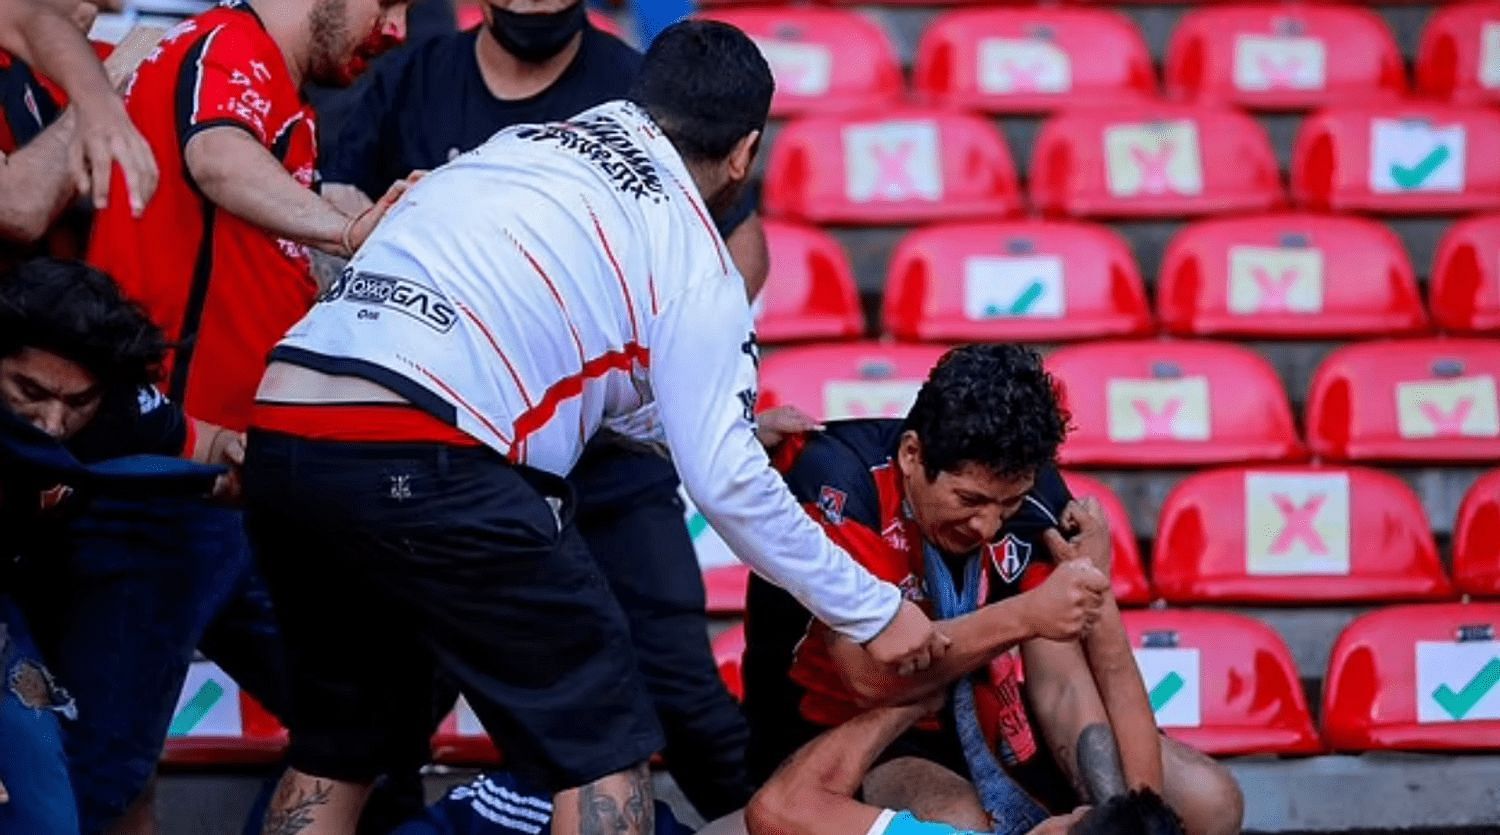 Fans were left seriously injured following the brawl (Image via Reuters)